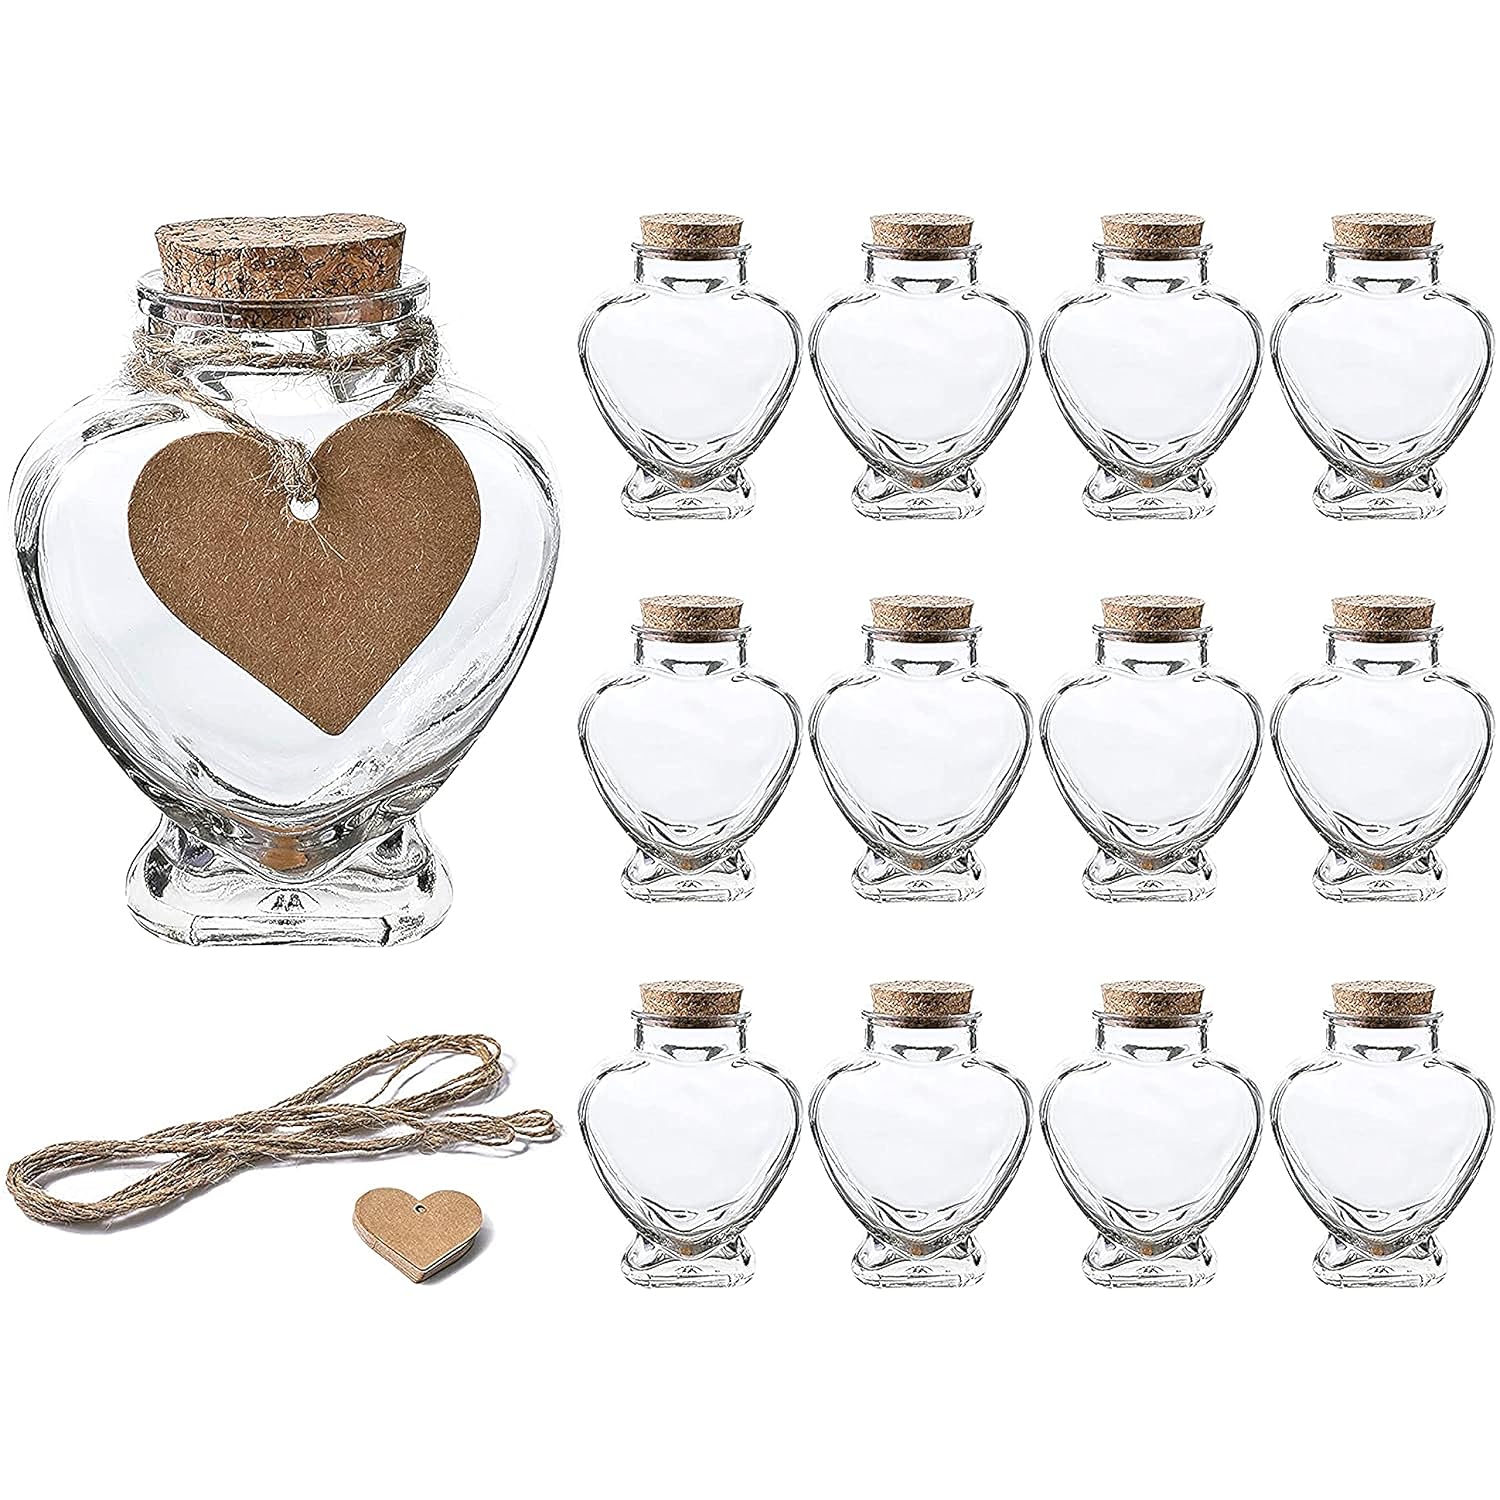 WHOLE HOUSEWARES Heart Shaped Glass Favor Jars with Cork Lids | Set of 12 | 5oz Wish Bottles with Personalized Heart Shaped Label Tags and String (12)